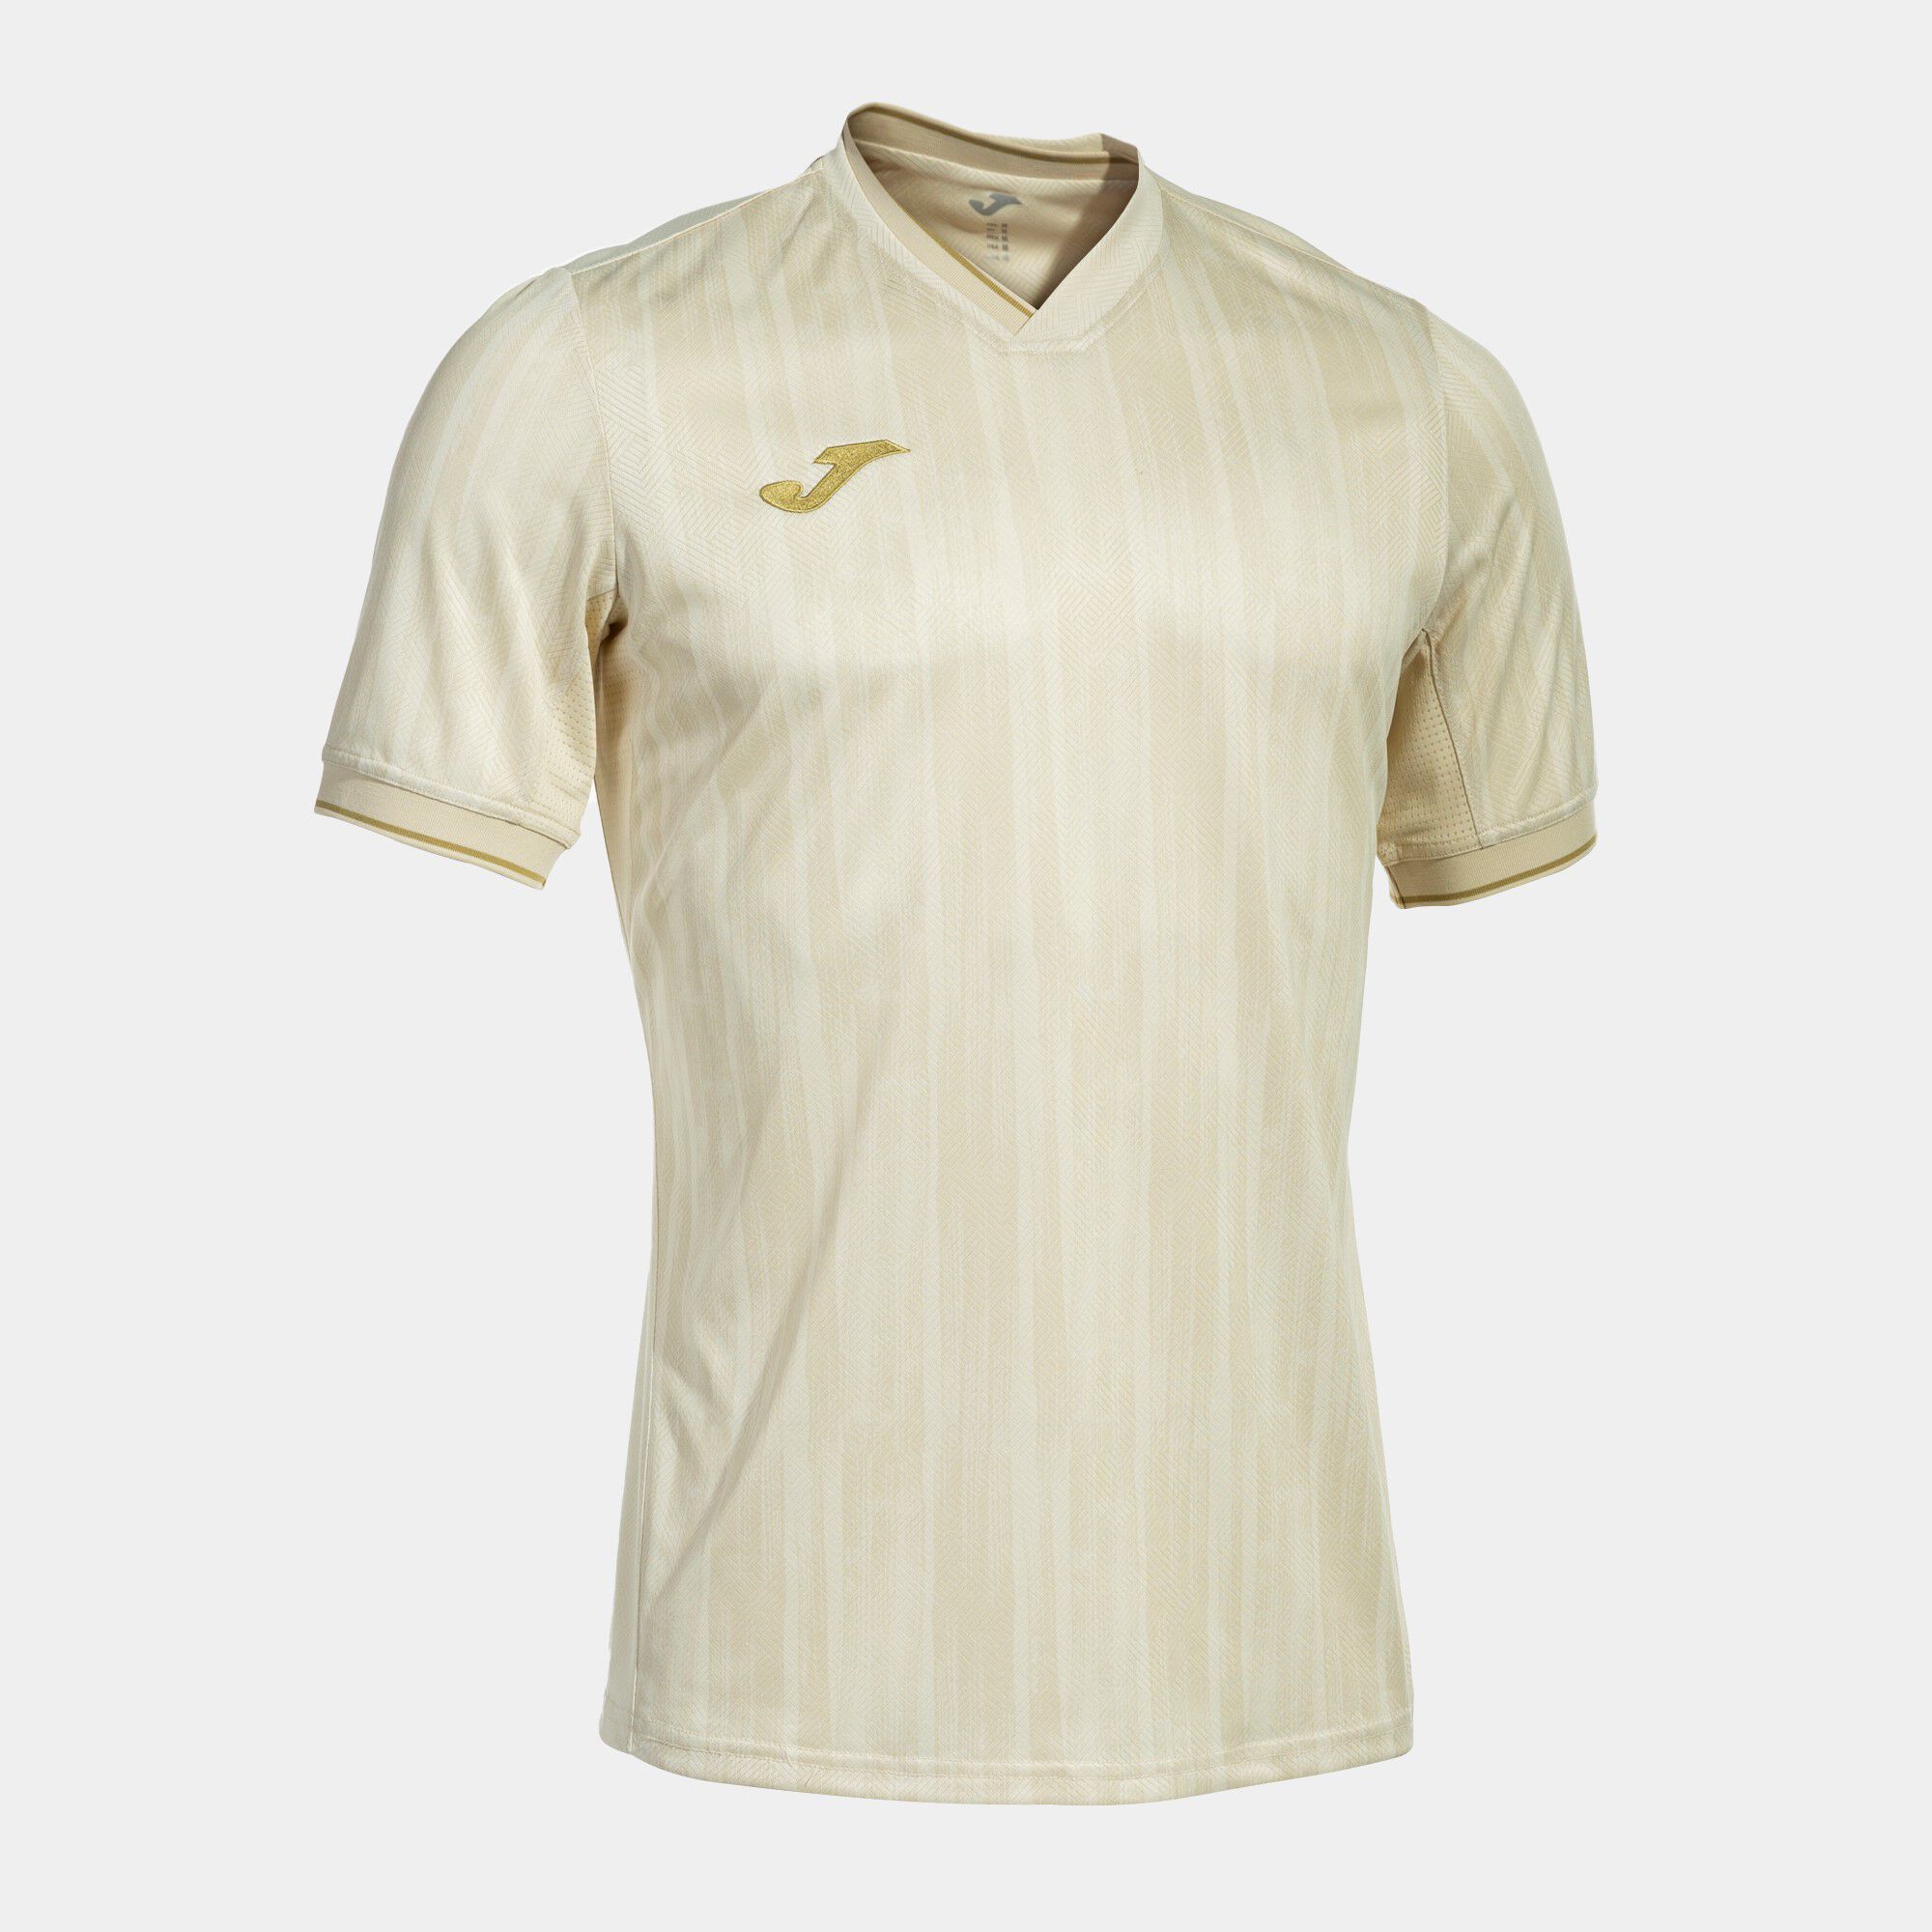 Maillot manches courtes homme Gold VI beige or